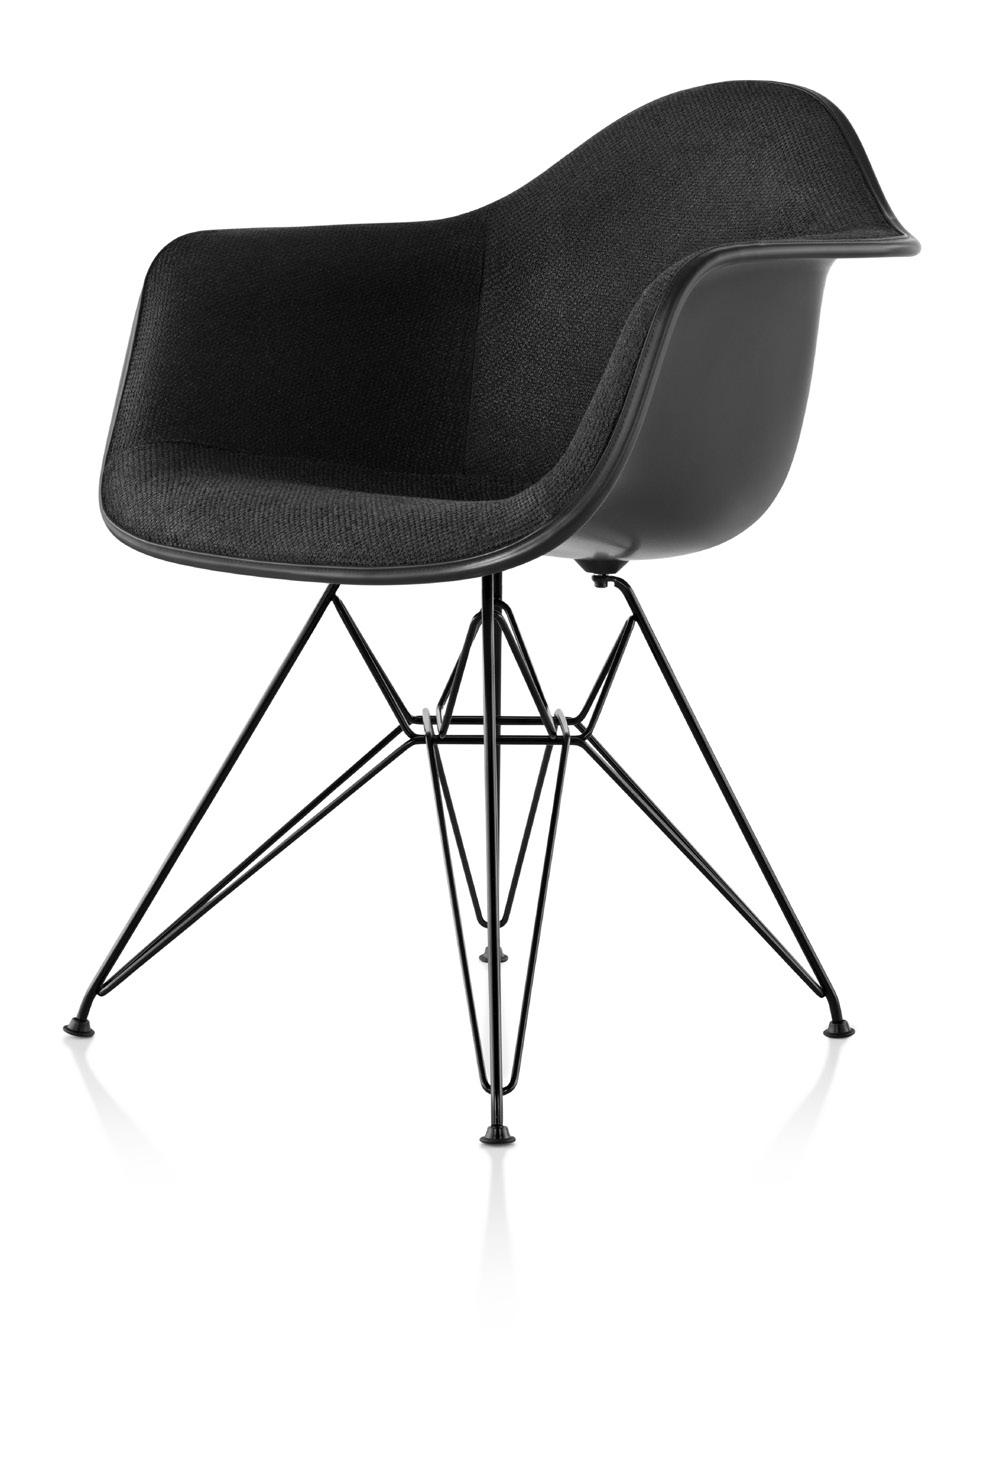 Eames Upholstered Molded Plastic Armchair Wire Base Comfortable and lightweight, and updated with modern materials, the clean, simple form of Charles and Ray Eames original 1948 design